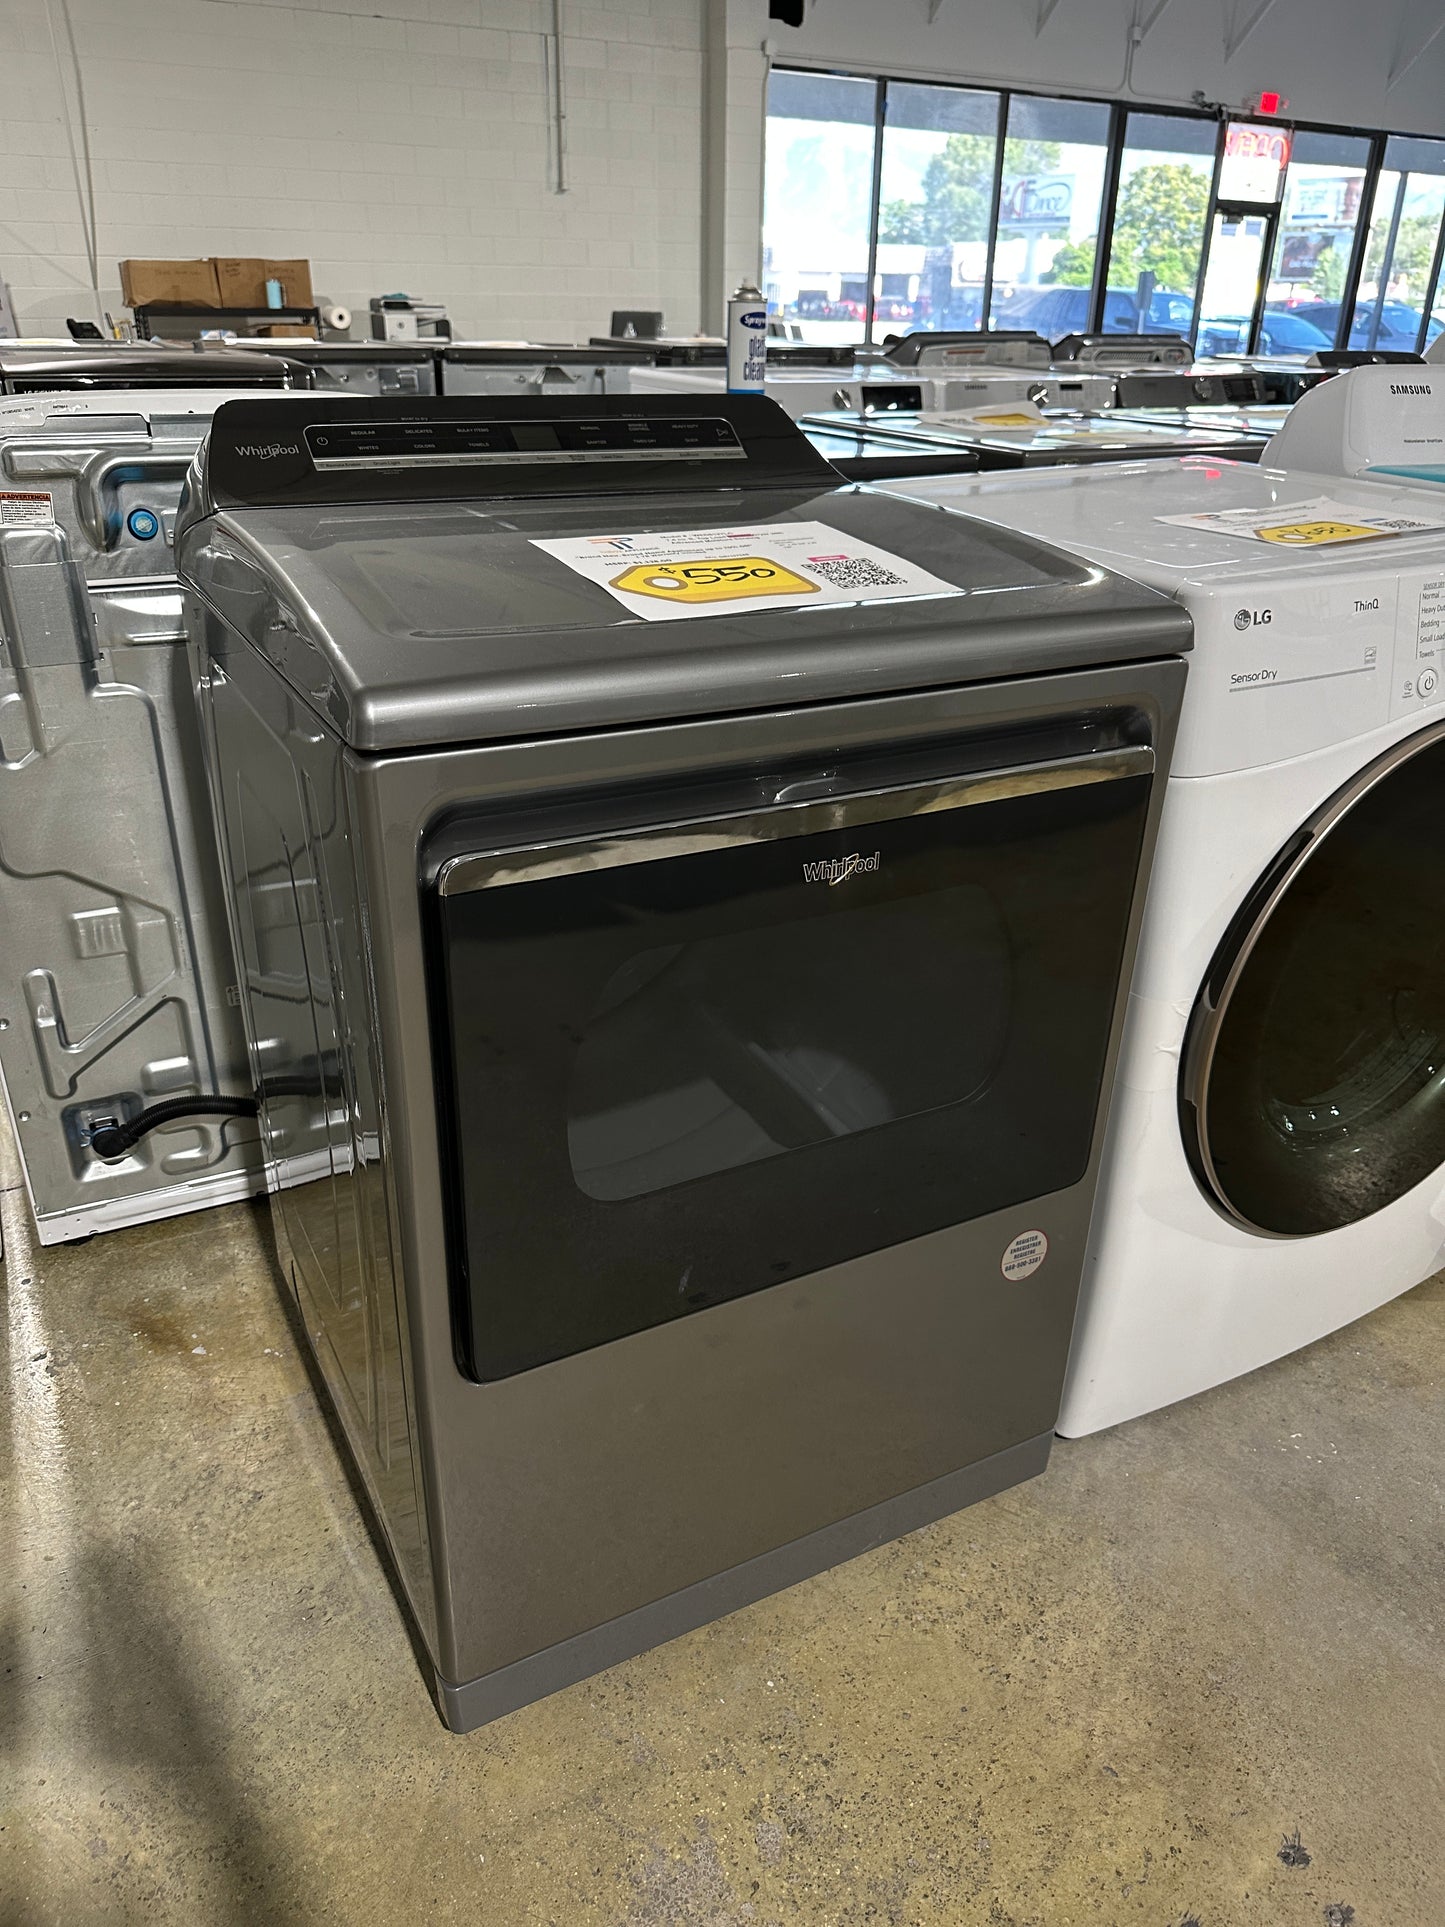 WHIRLPOOL SMART ELECTRIC DRYER - Model:WED8127LC  DRY11754S